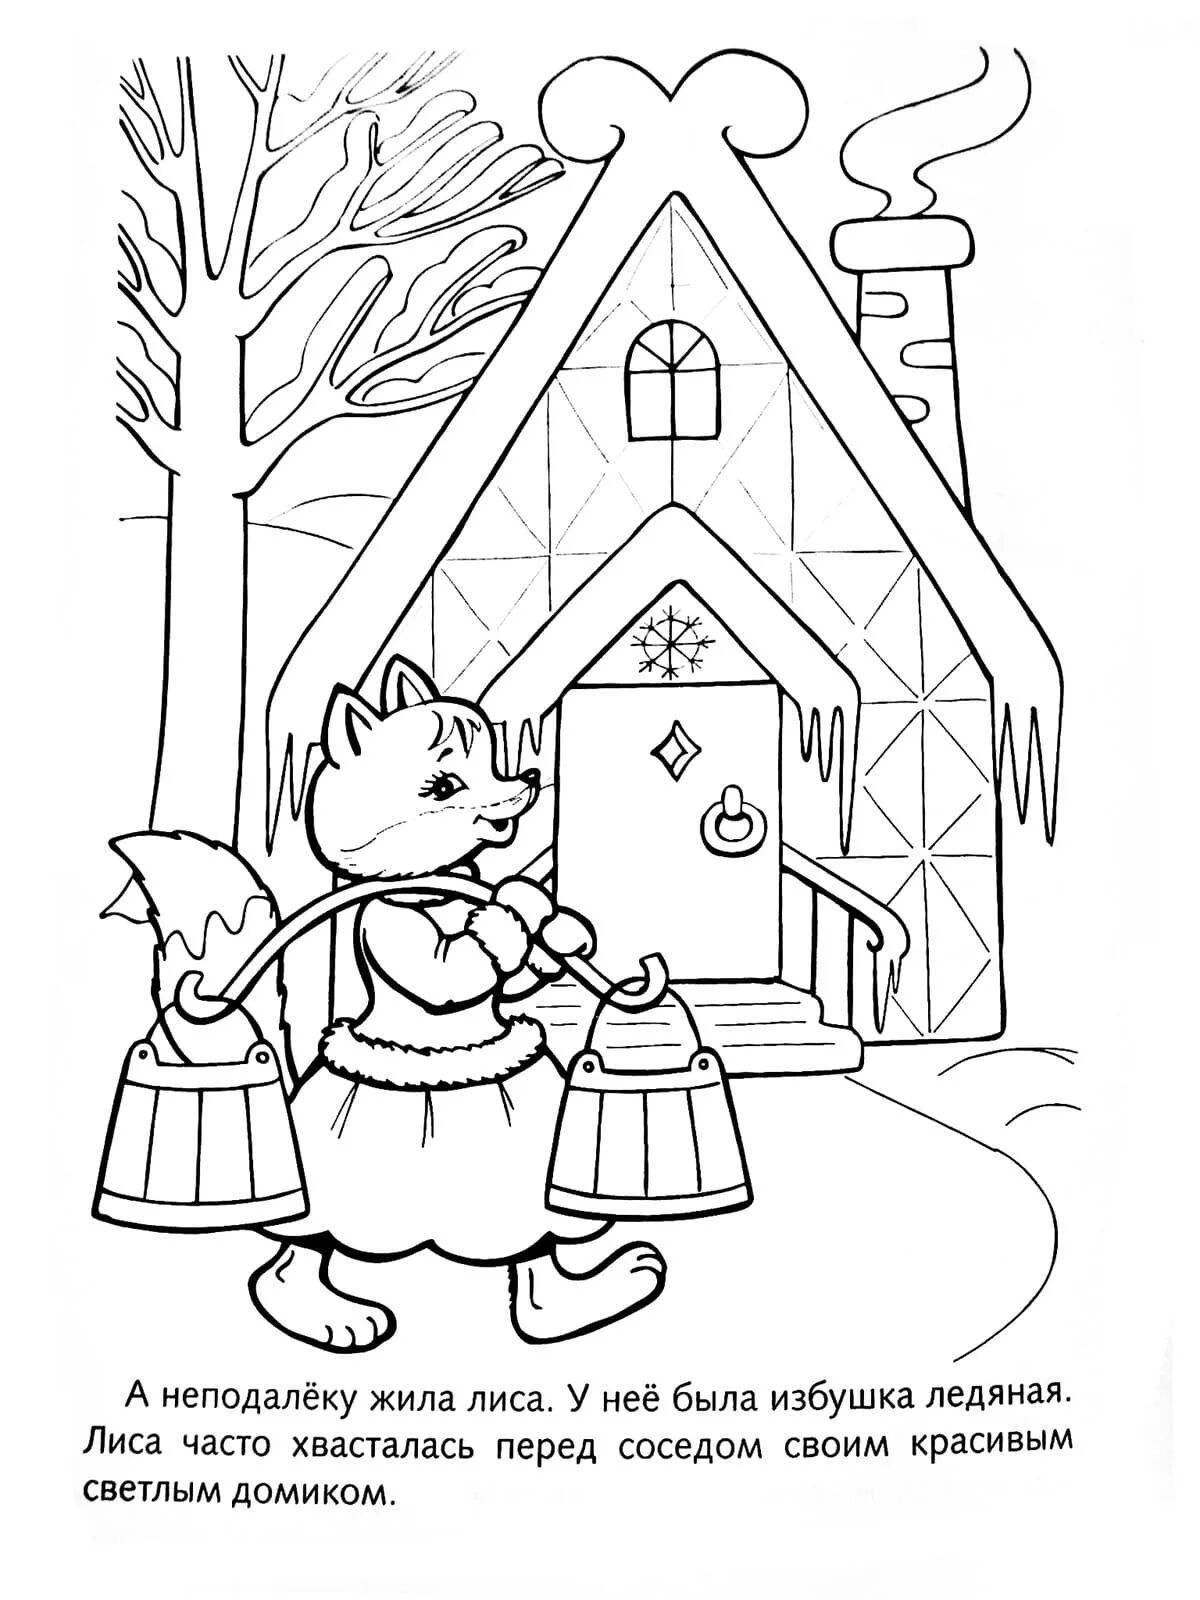 Beautiful ice hut coloring page